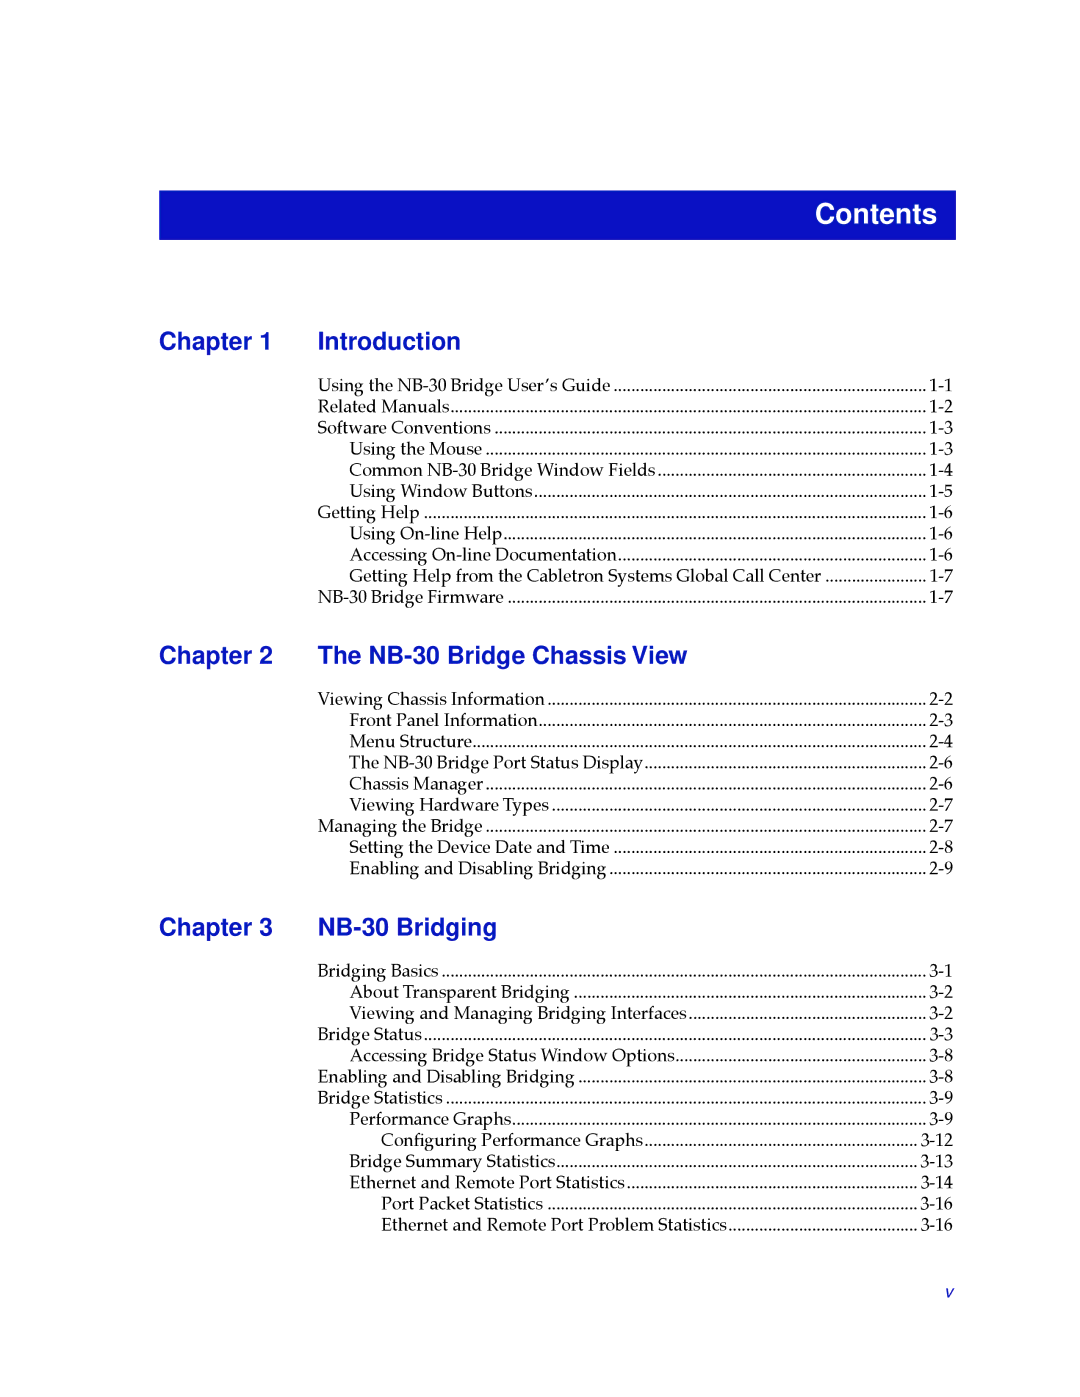 Cabletron Systems NB30 manual Contents 